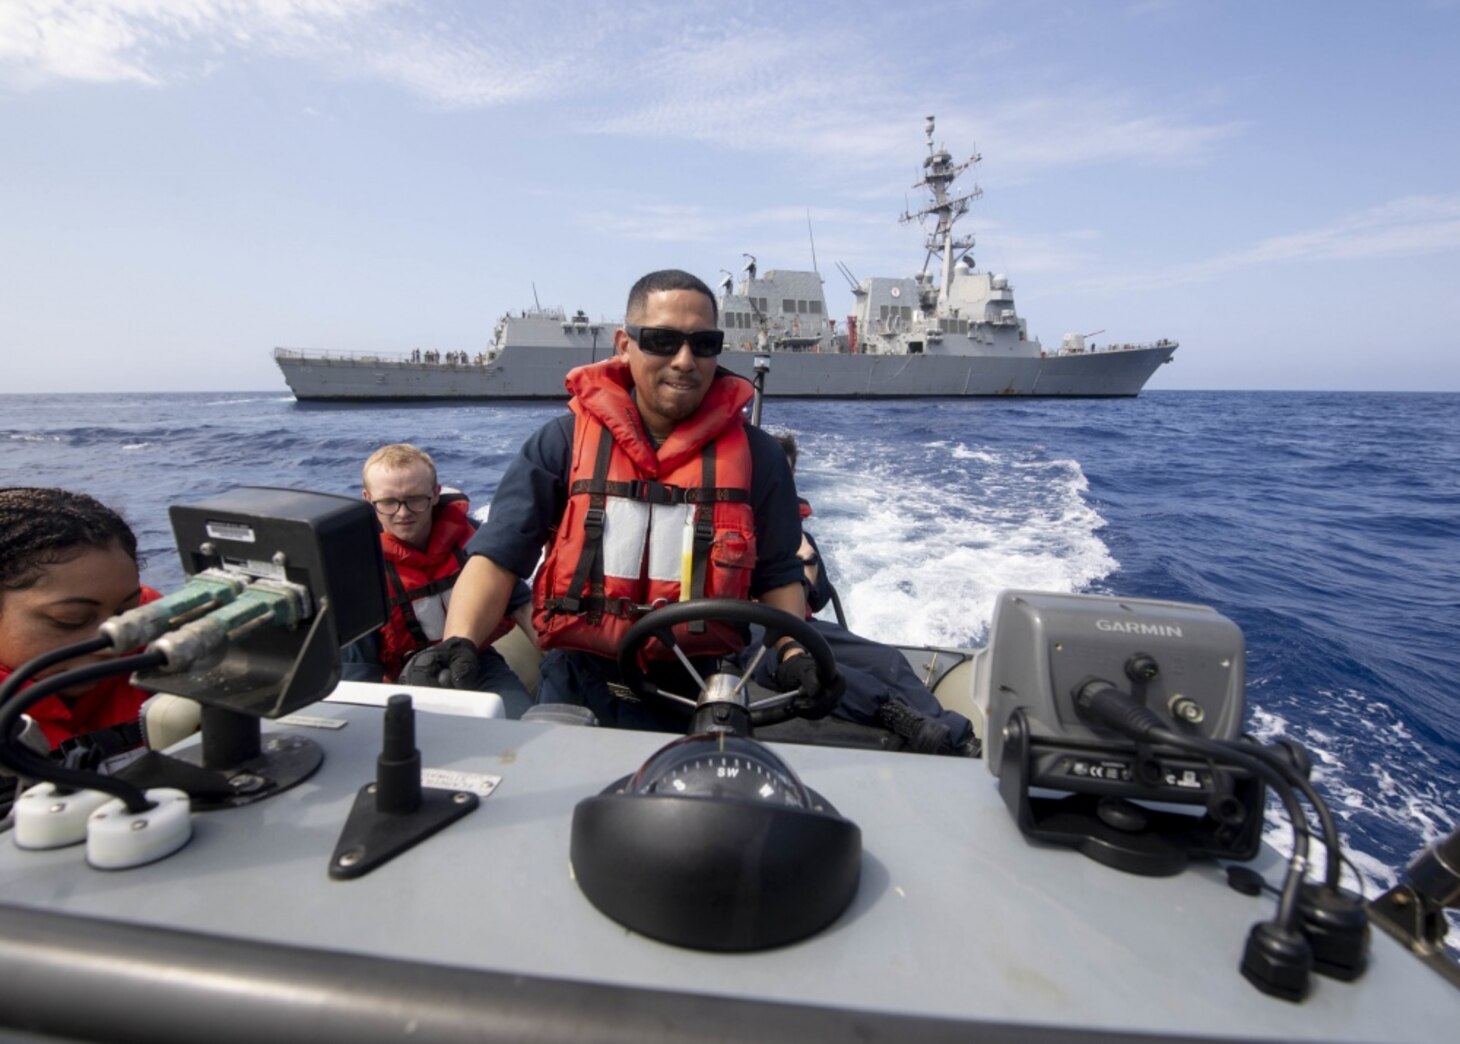 PHILIPPINE SEA (May 12, 2020) U.S. Navy Boatswain’s Mate 2nd Class Eric Alexander, from Houston, operates a rigid-hull inflatable boat during a man overboard drill with the Arleigh Burke-class guided-missile destroyer USS Rafael Peralta (DDG 115). Rafael Peralta is deployed to the U.S. 7th Fleet area of operations in support of security and stability in the Indo-Pacific region.